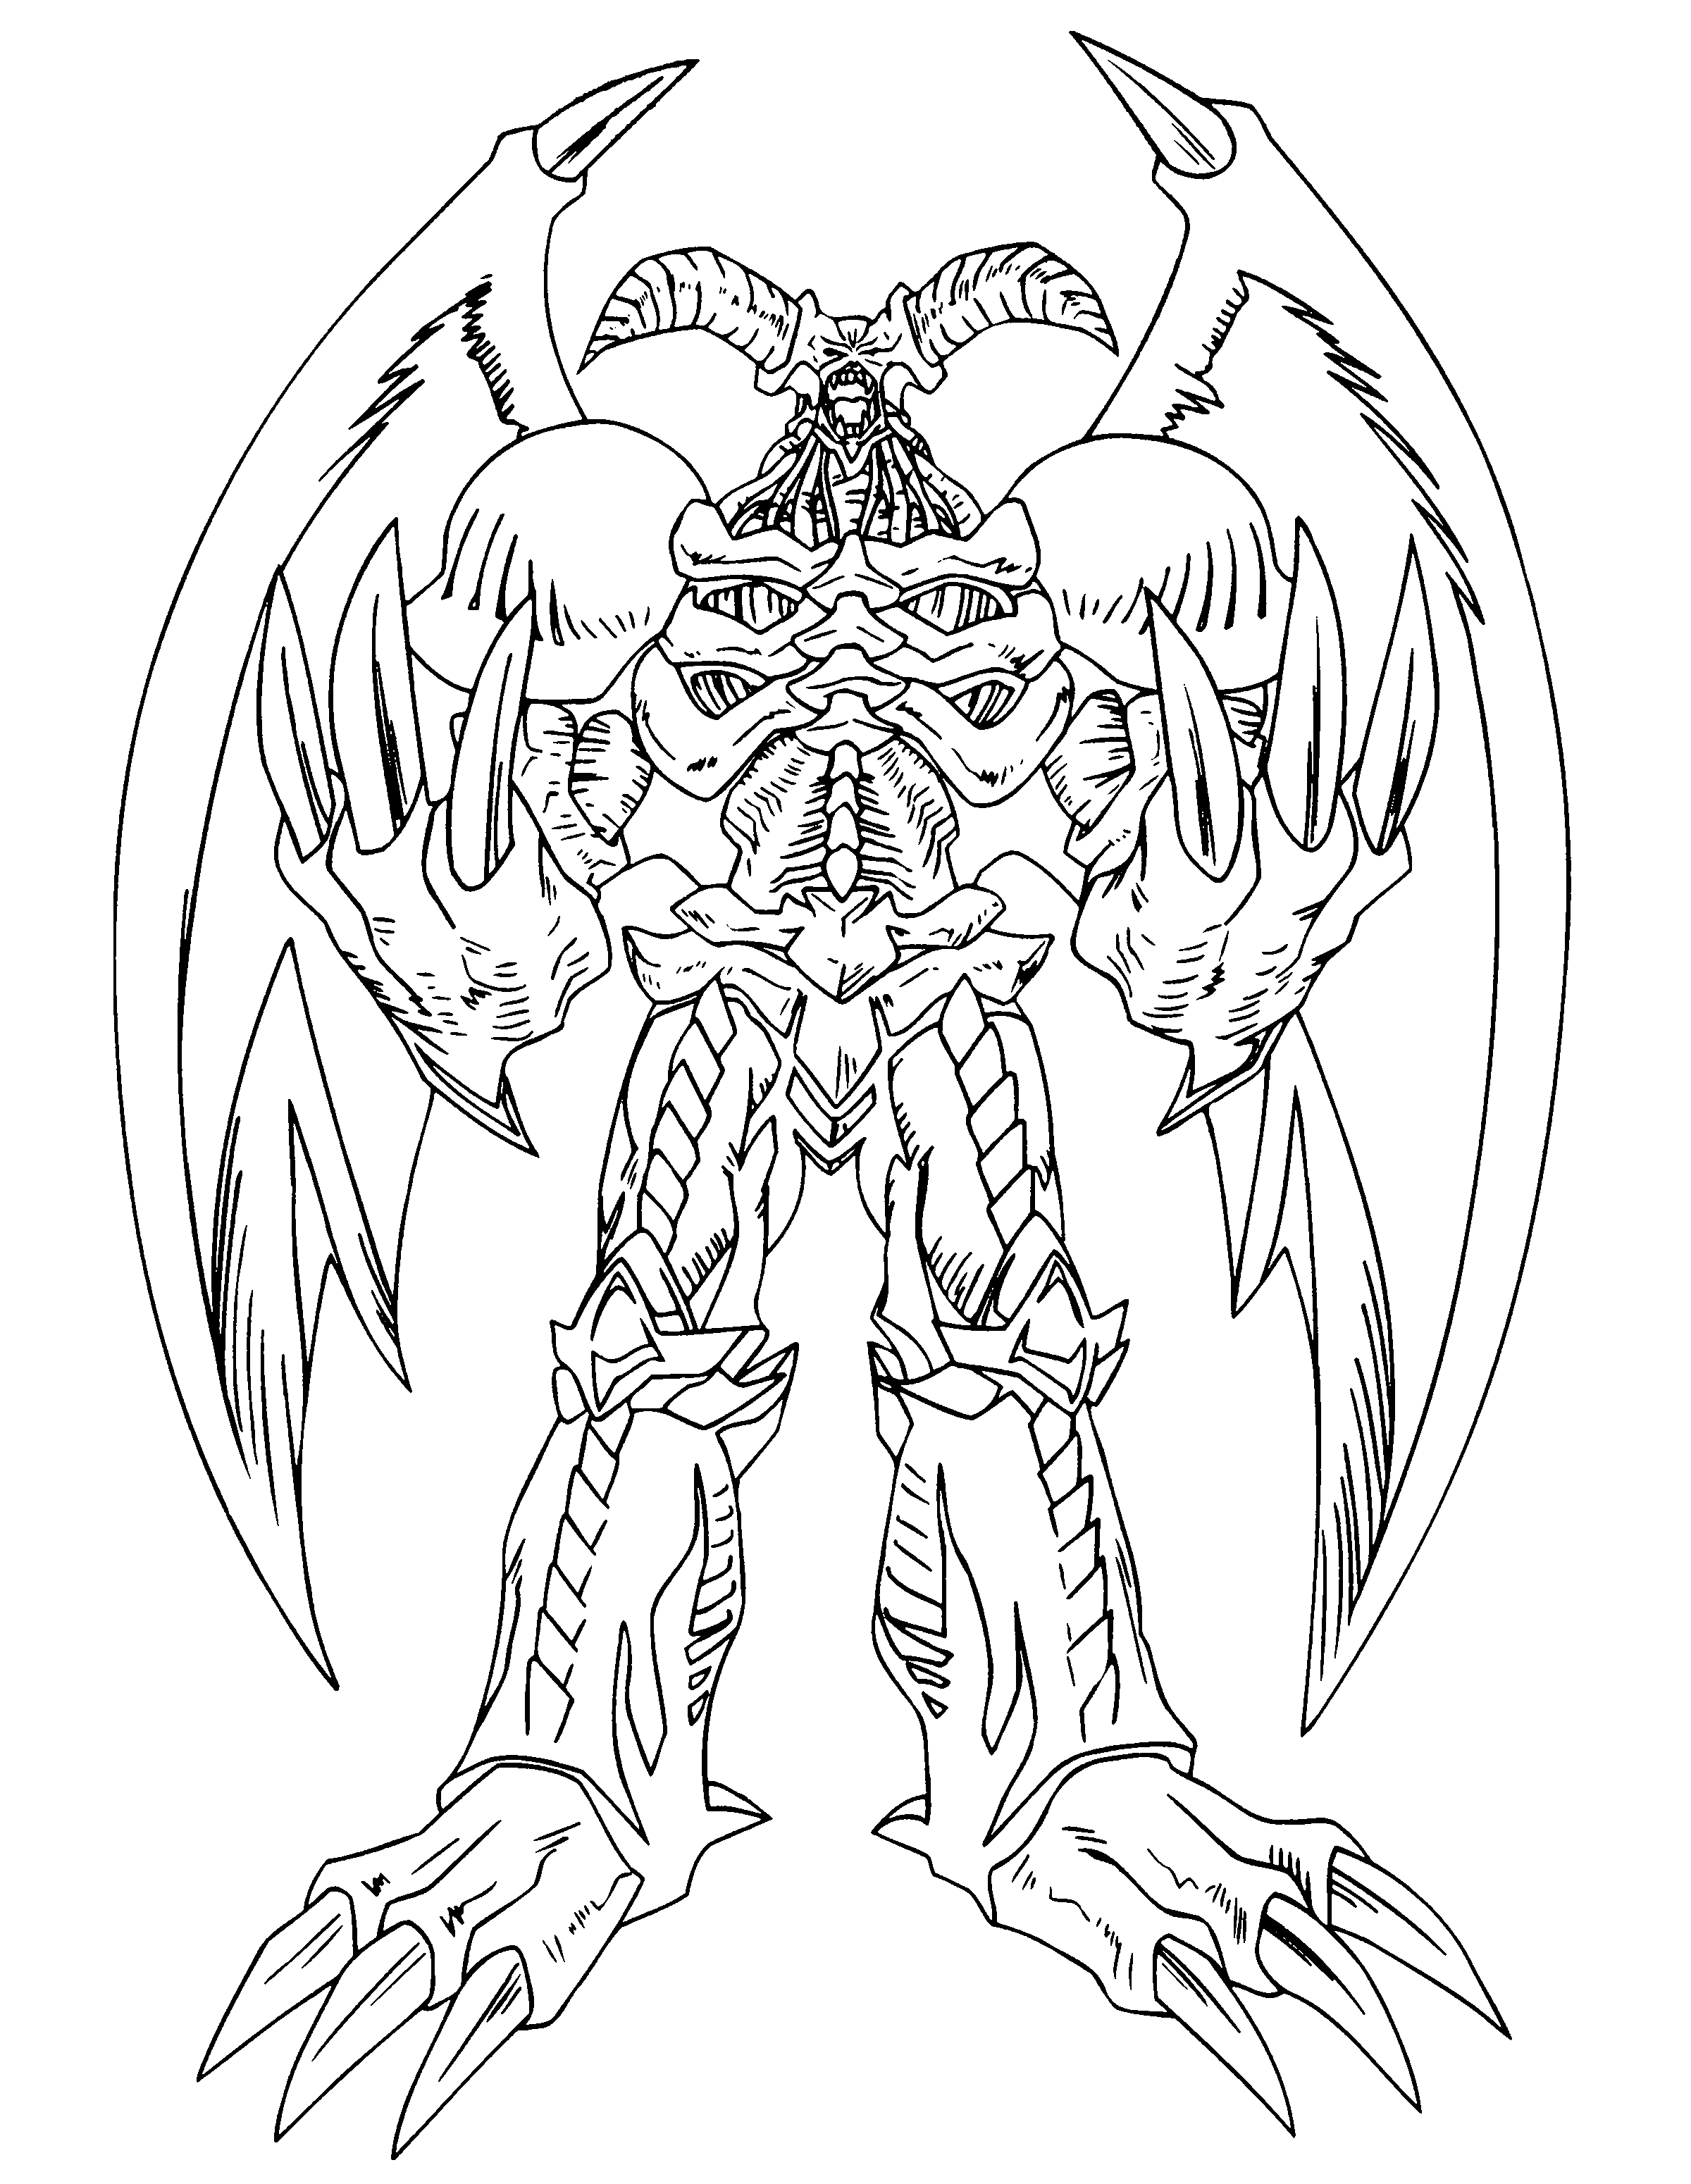 animated-coloring-pages-yu-gi-oh-image-0075